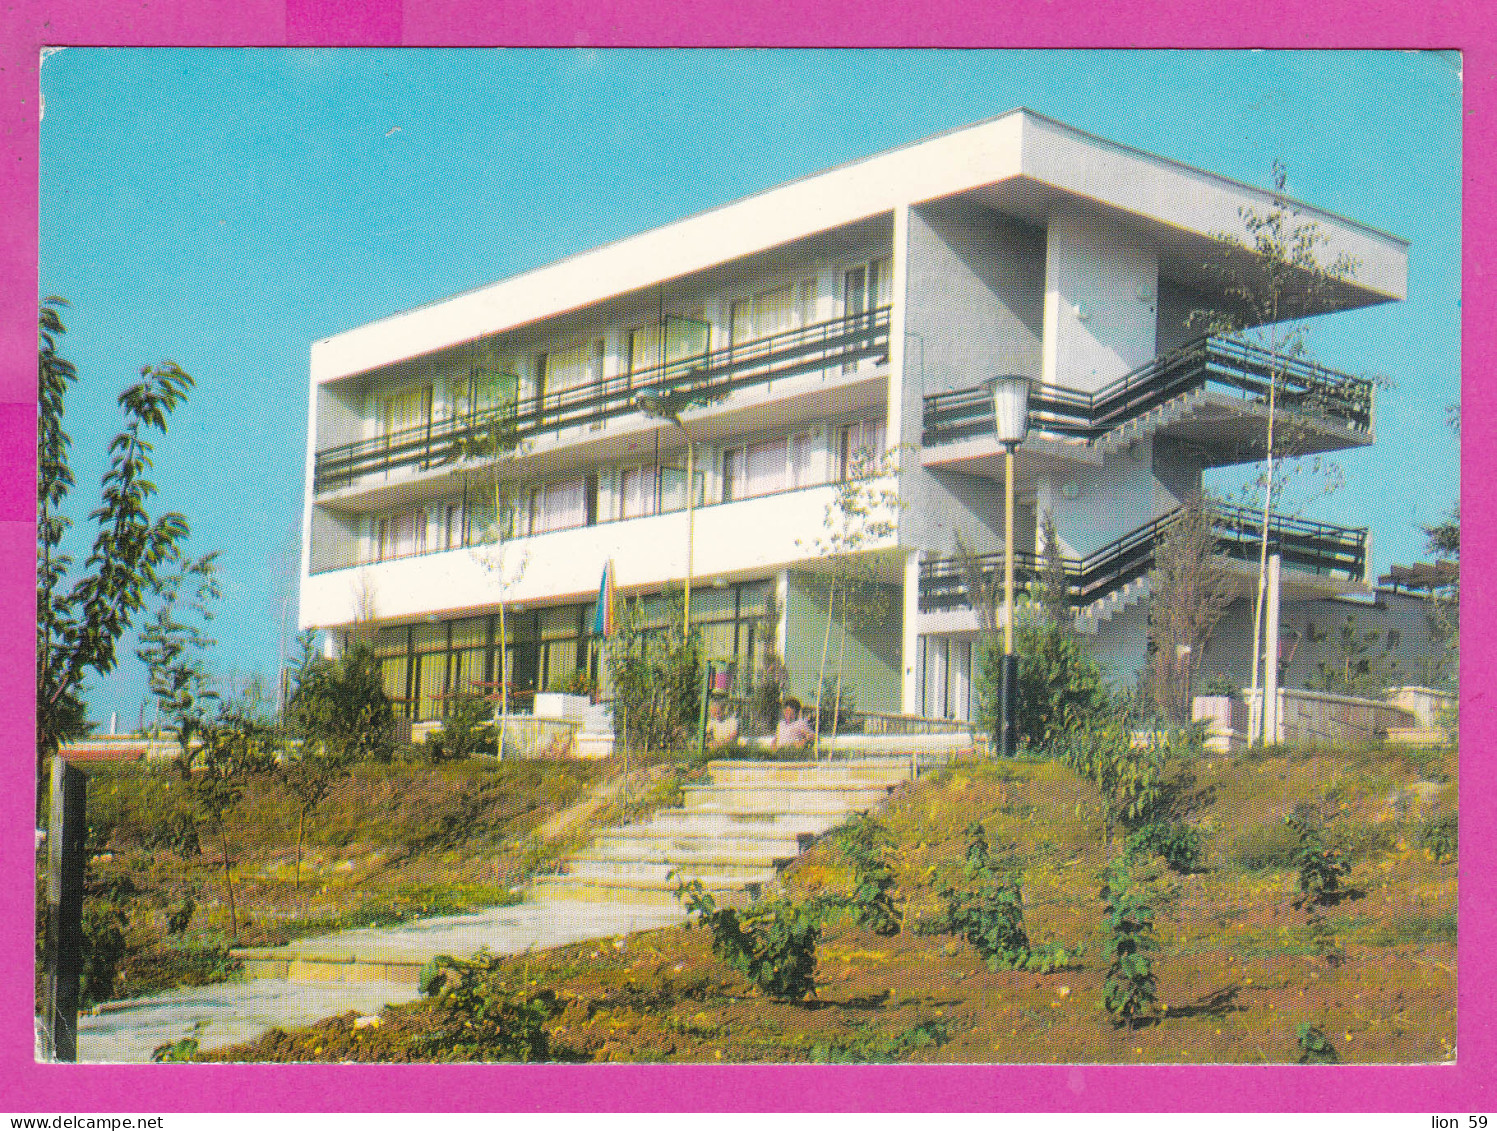 310621 / Bulgaria - Kiten ( Burgas Region) Hotel , Rest Station Of The Central Council Of Bulgarian Trade Unions 1977 PC - Hotels & Gaststätten